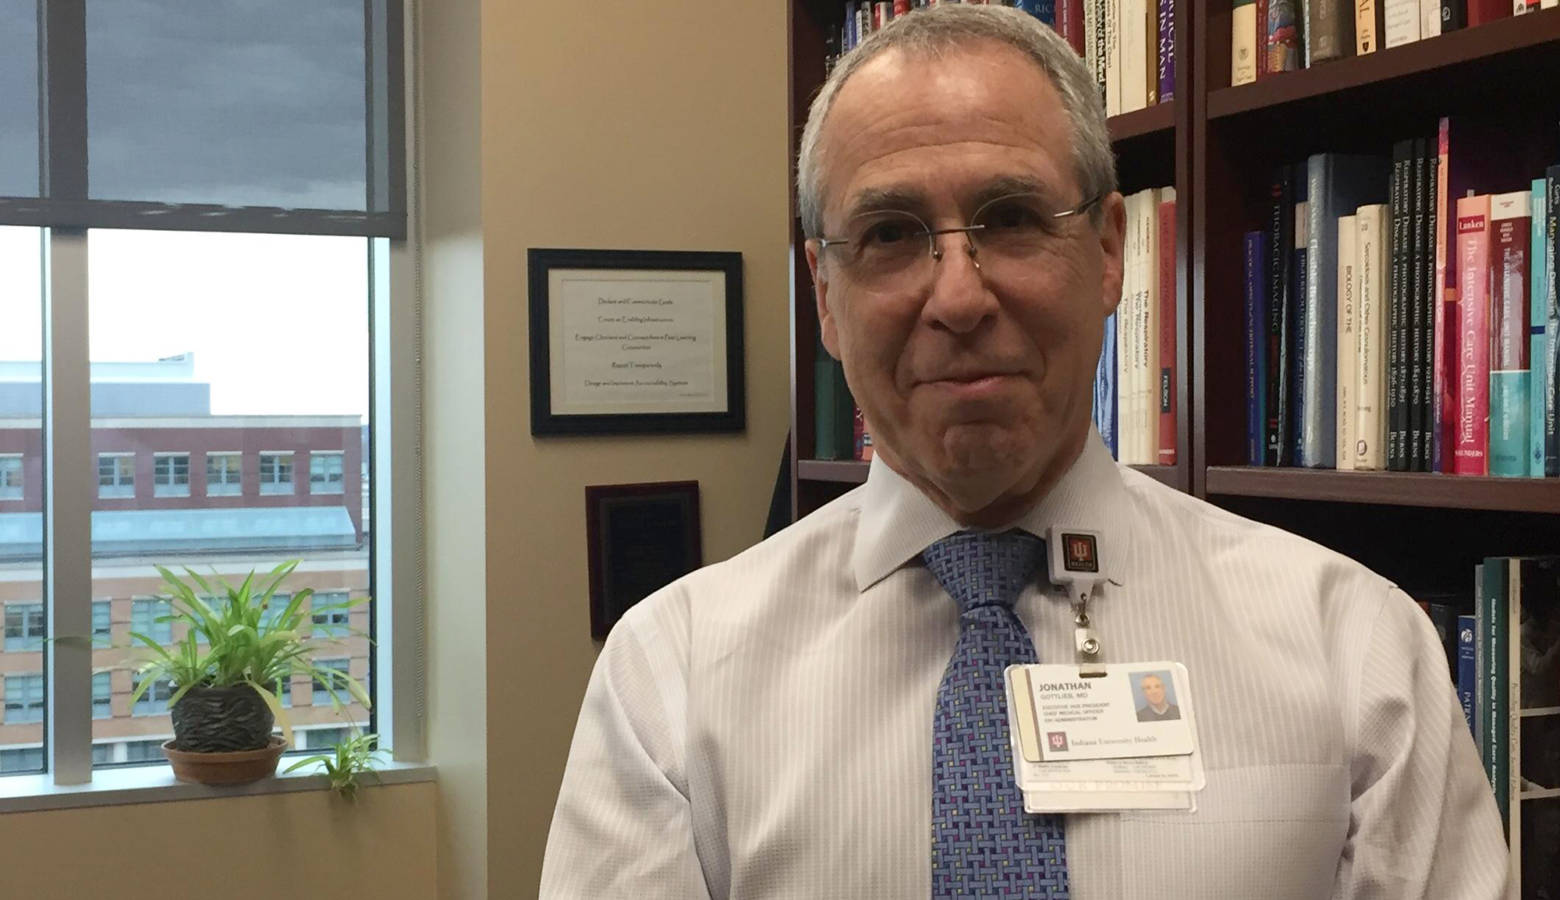 IU Health Chief Medical Executive Jonathan Gottlieb says the system's approach to opioids has allowed prescribers to reassess their practices. (Jill Sheridan/IPB News)